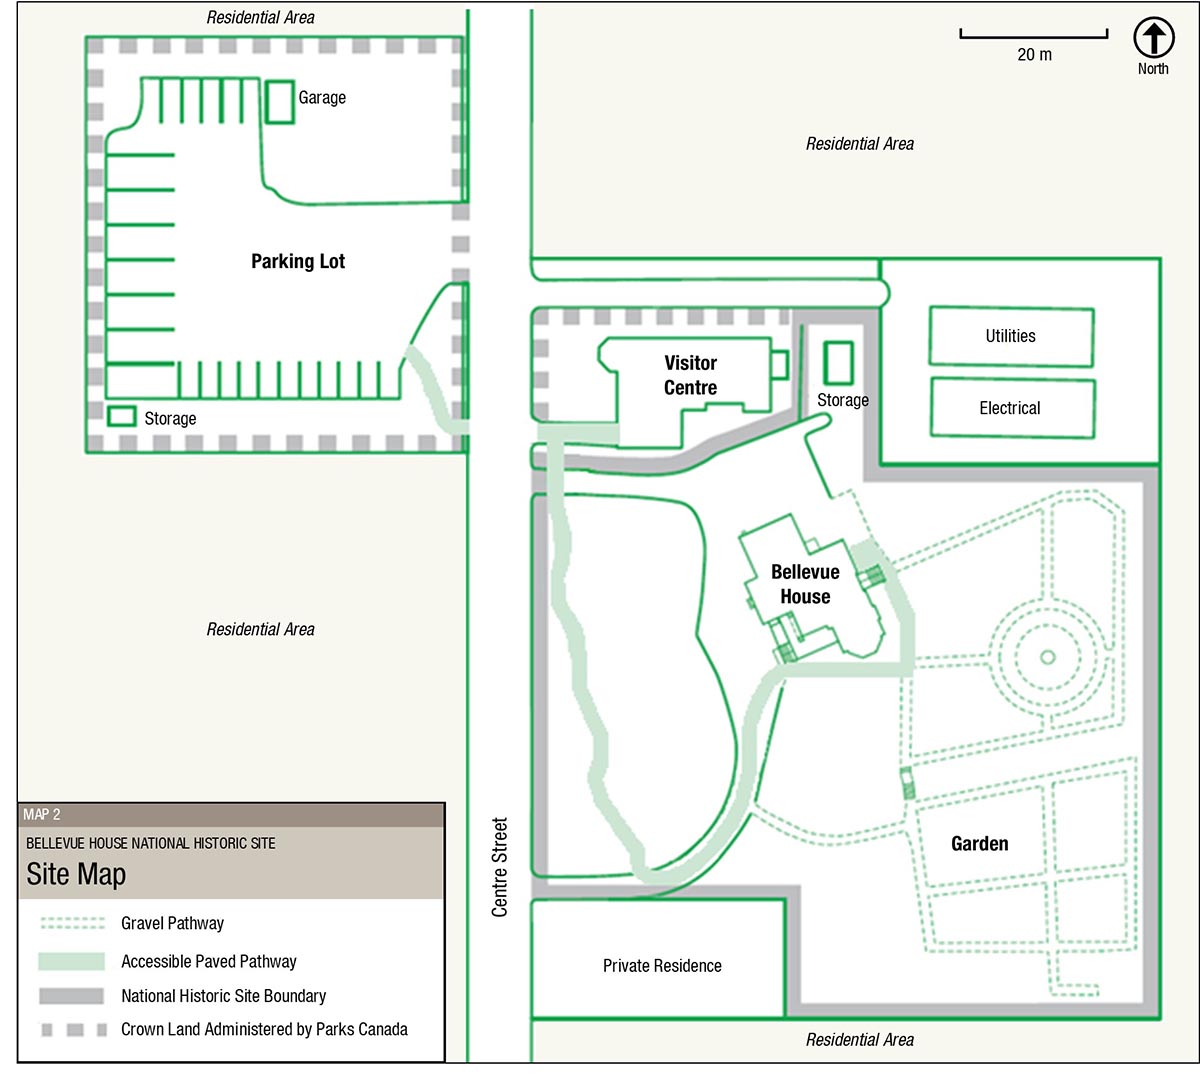 Map 2: Bellevue House National Historic Site — Text version follows.